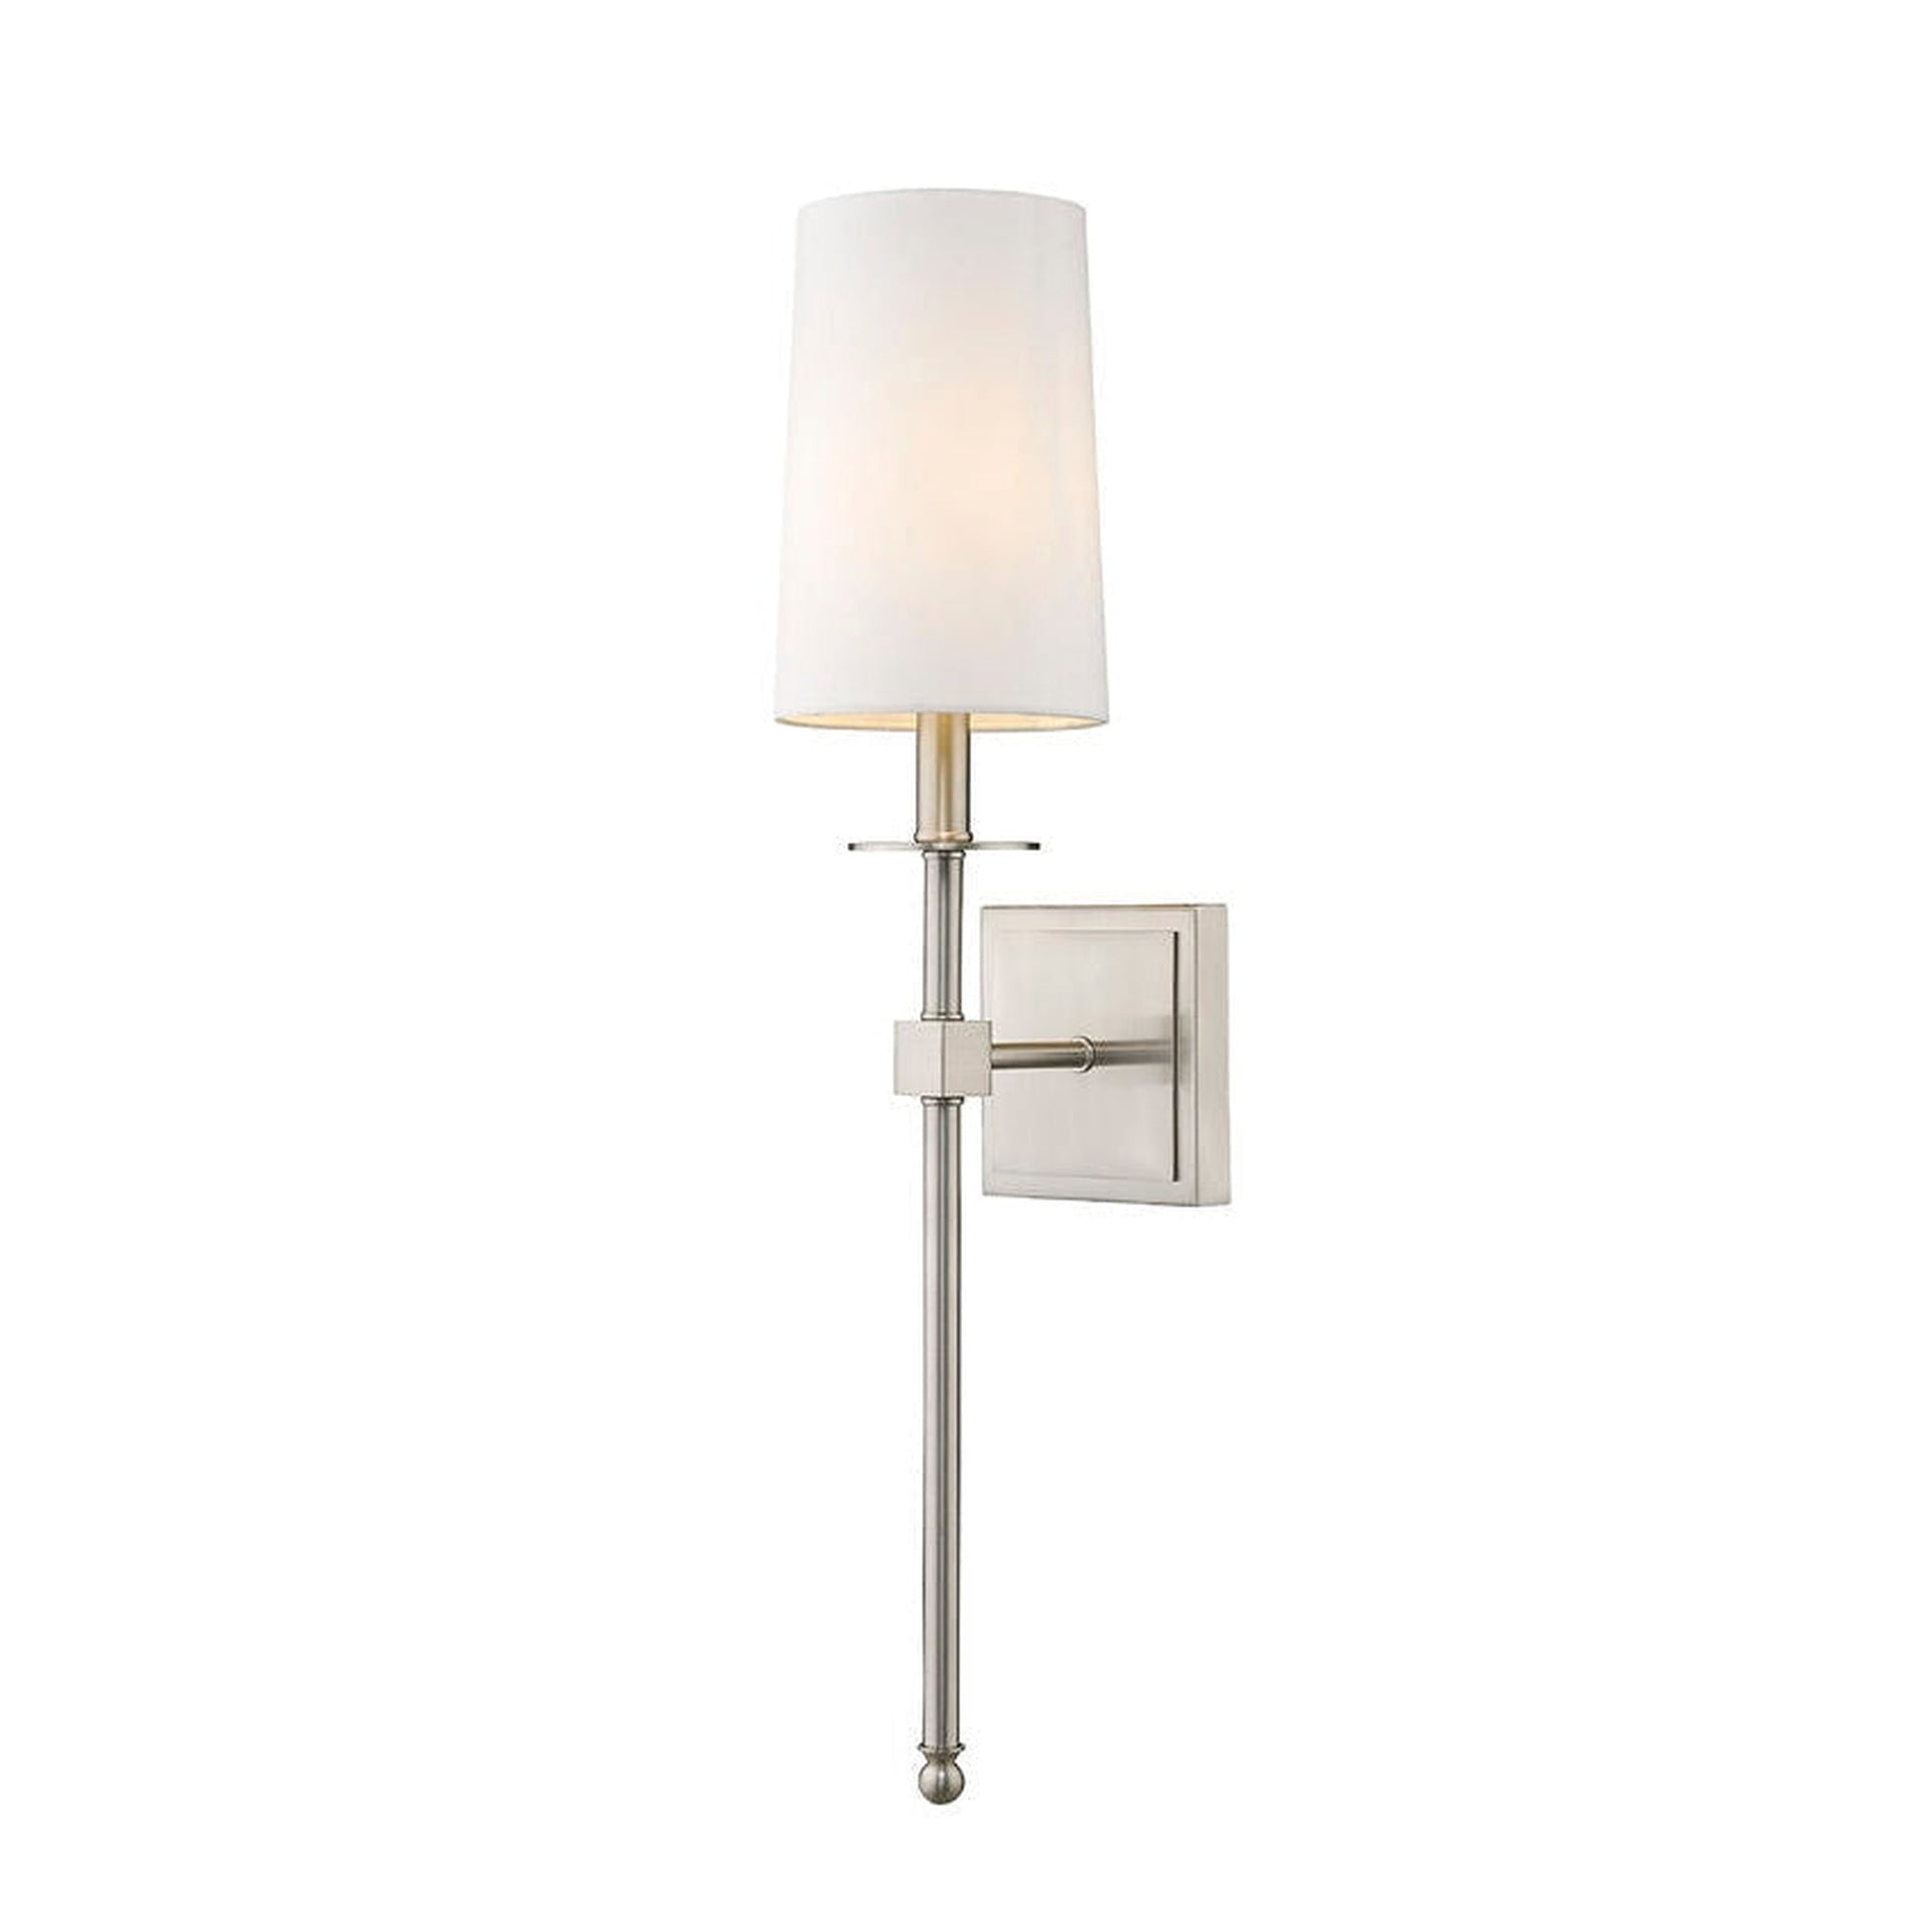 Z-Lite Camila 6" 1-Light Brushed Nickel Wall Sconce With White Fabric Shade